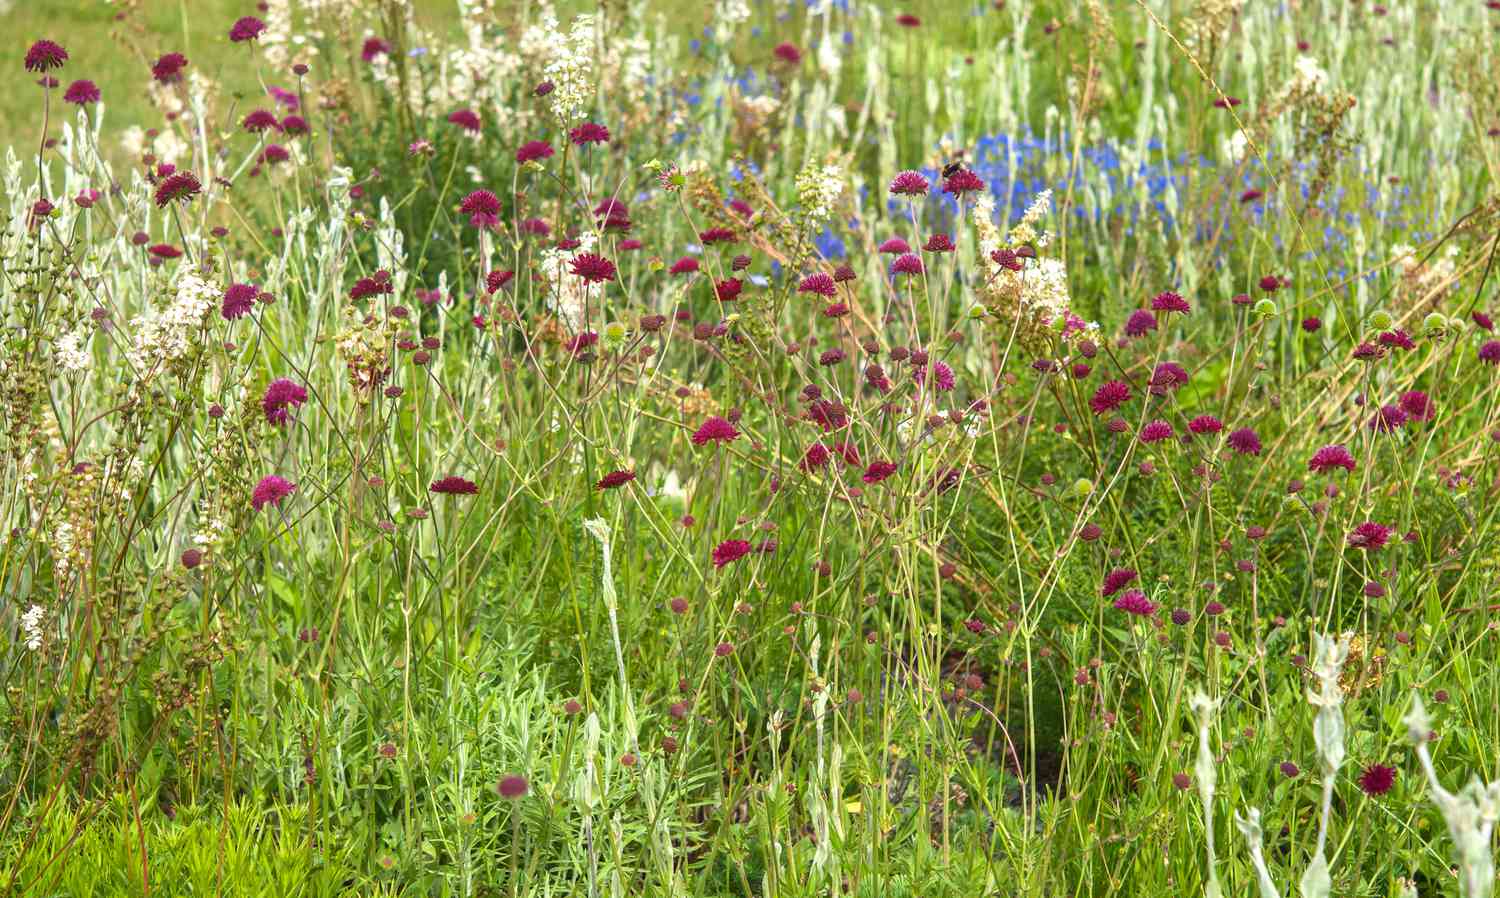 Knuatia plants in field with magenta and blue flowers